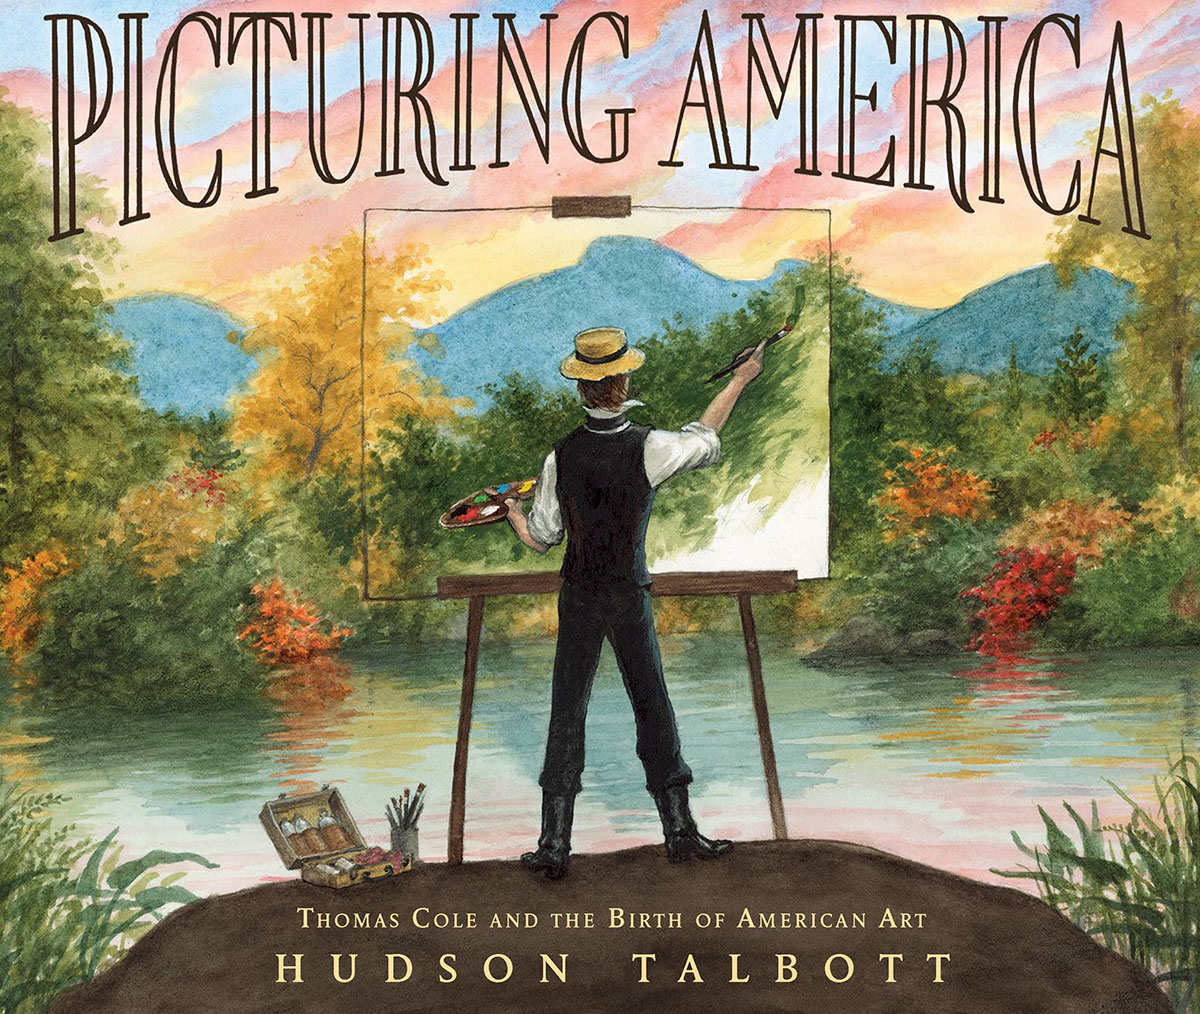 PICTURING AMERICA: Thomas Cole’s Story